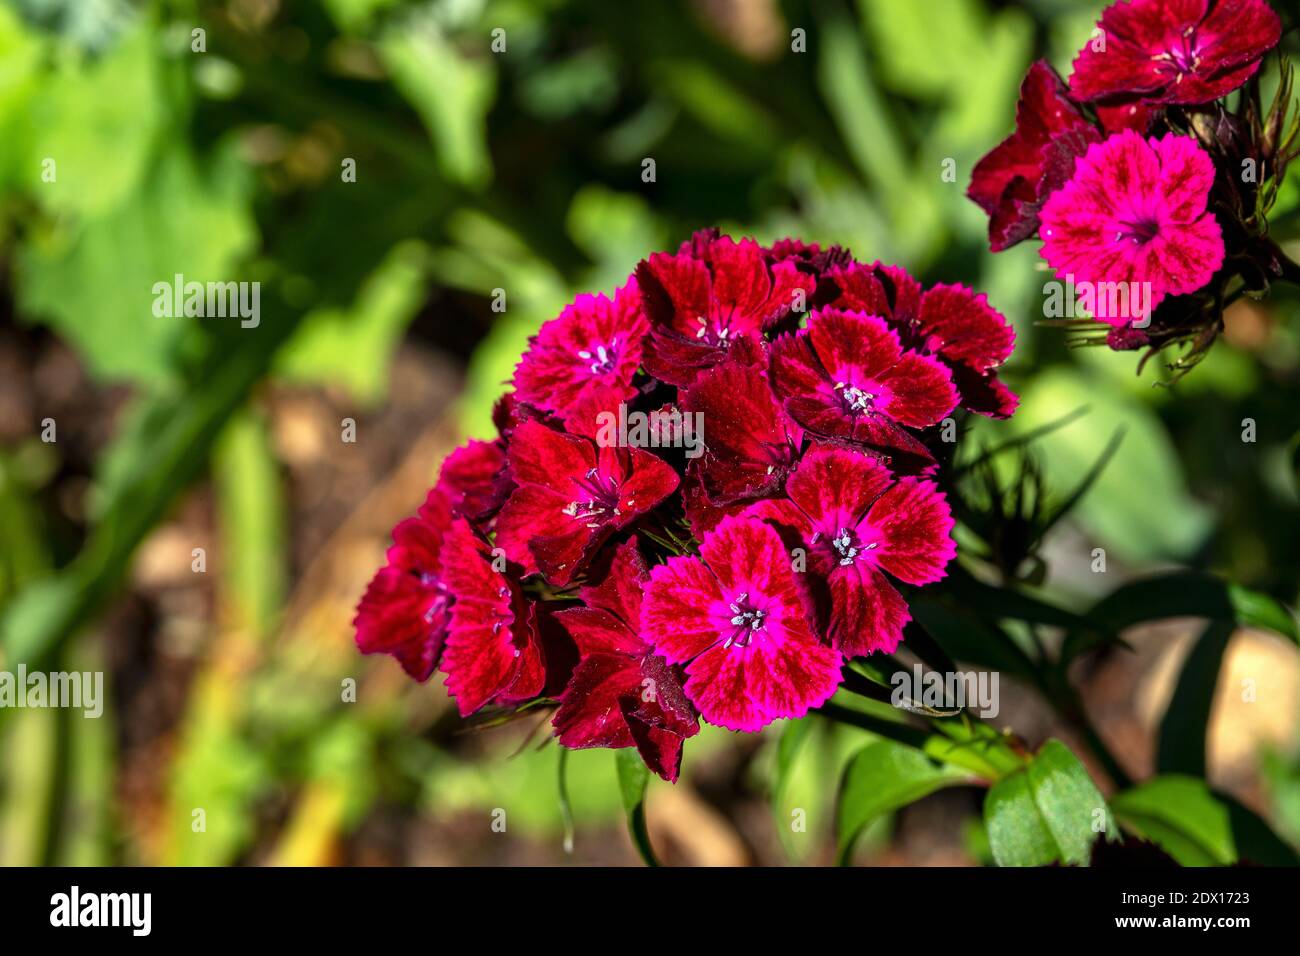 Red Dianthus High Resolution Stock Photography and Images - Alamy